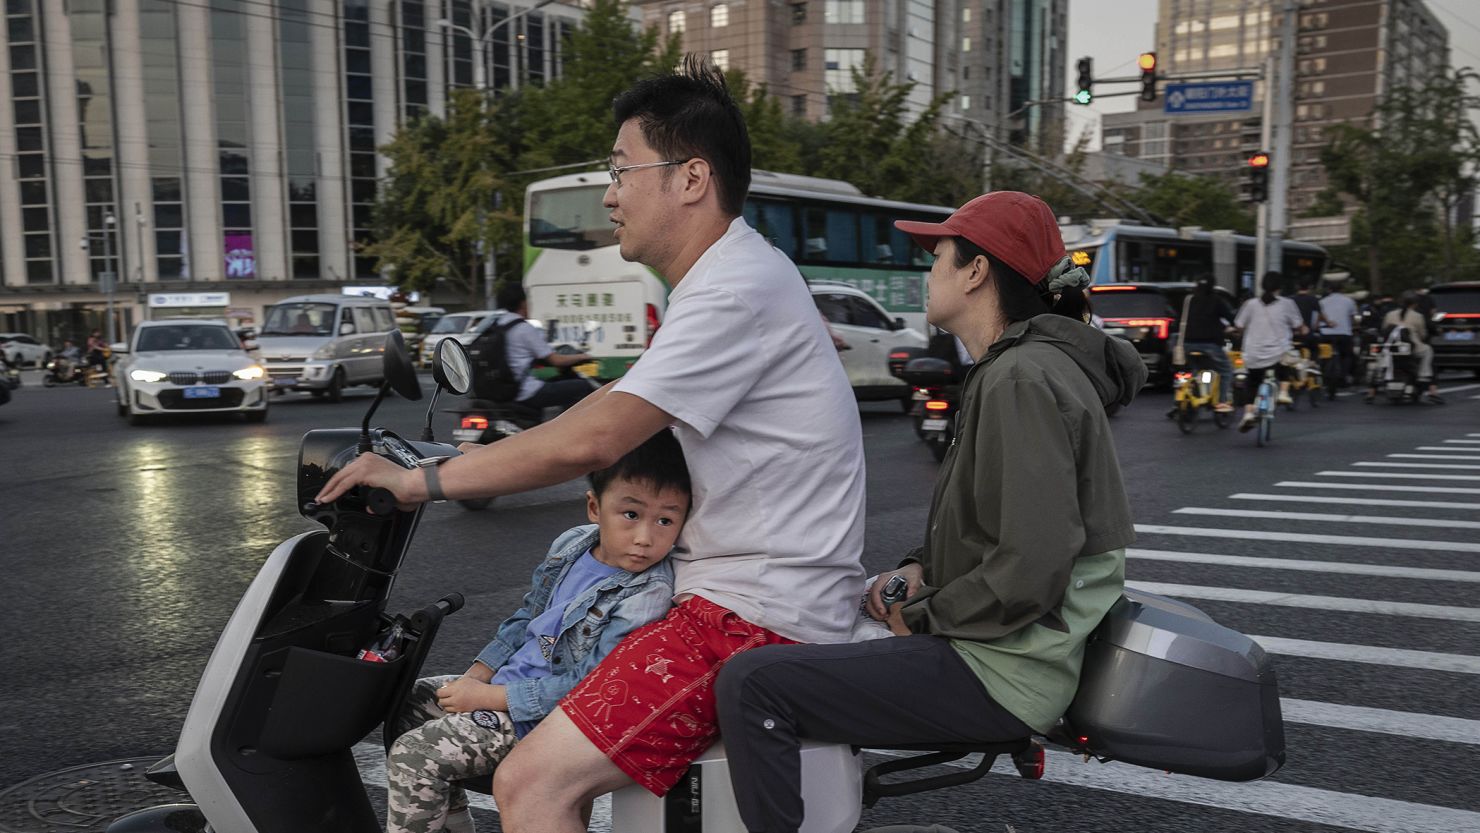 A boy riding with his parents on a scooter in Beijing, China, on September 13, 2023.